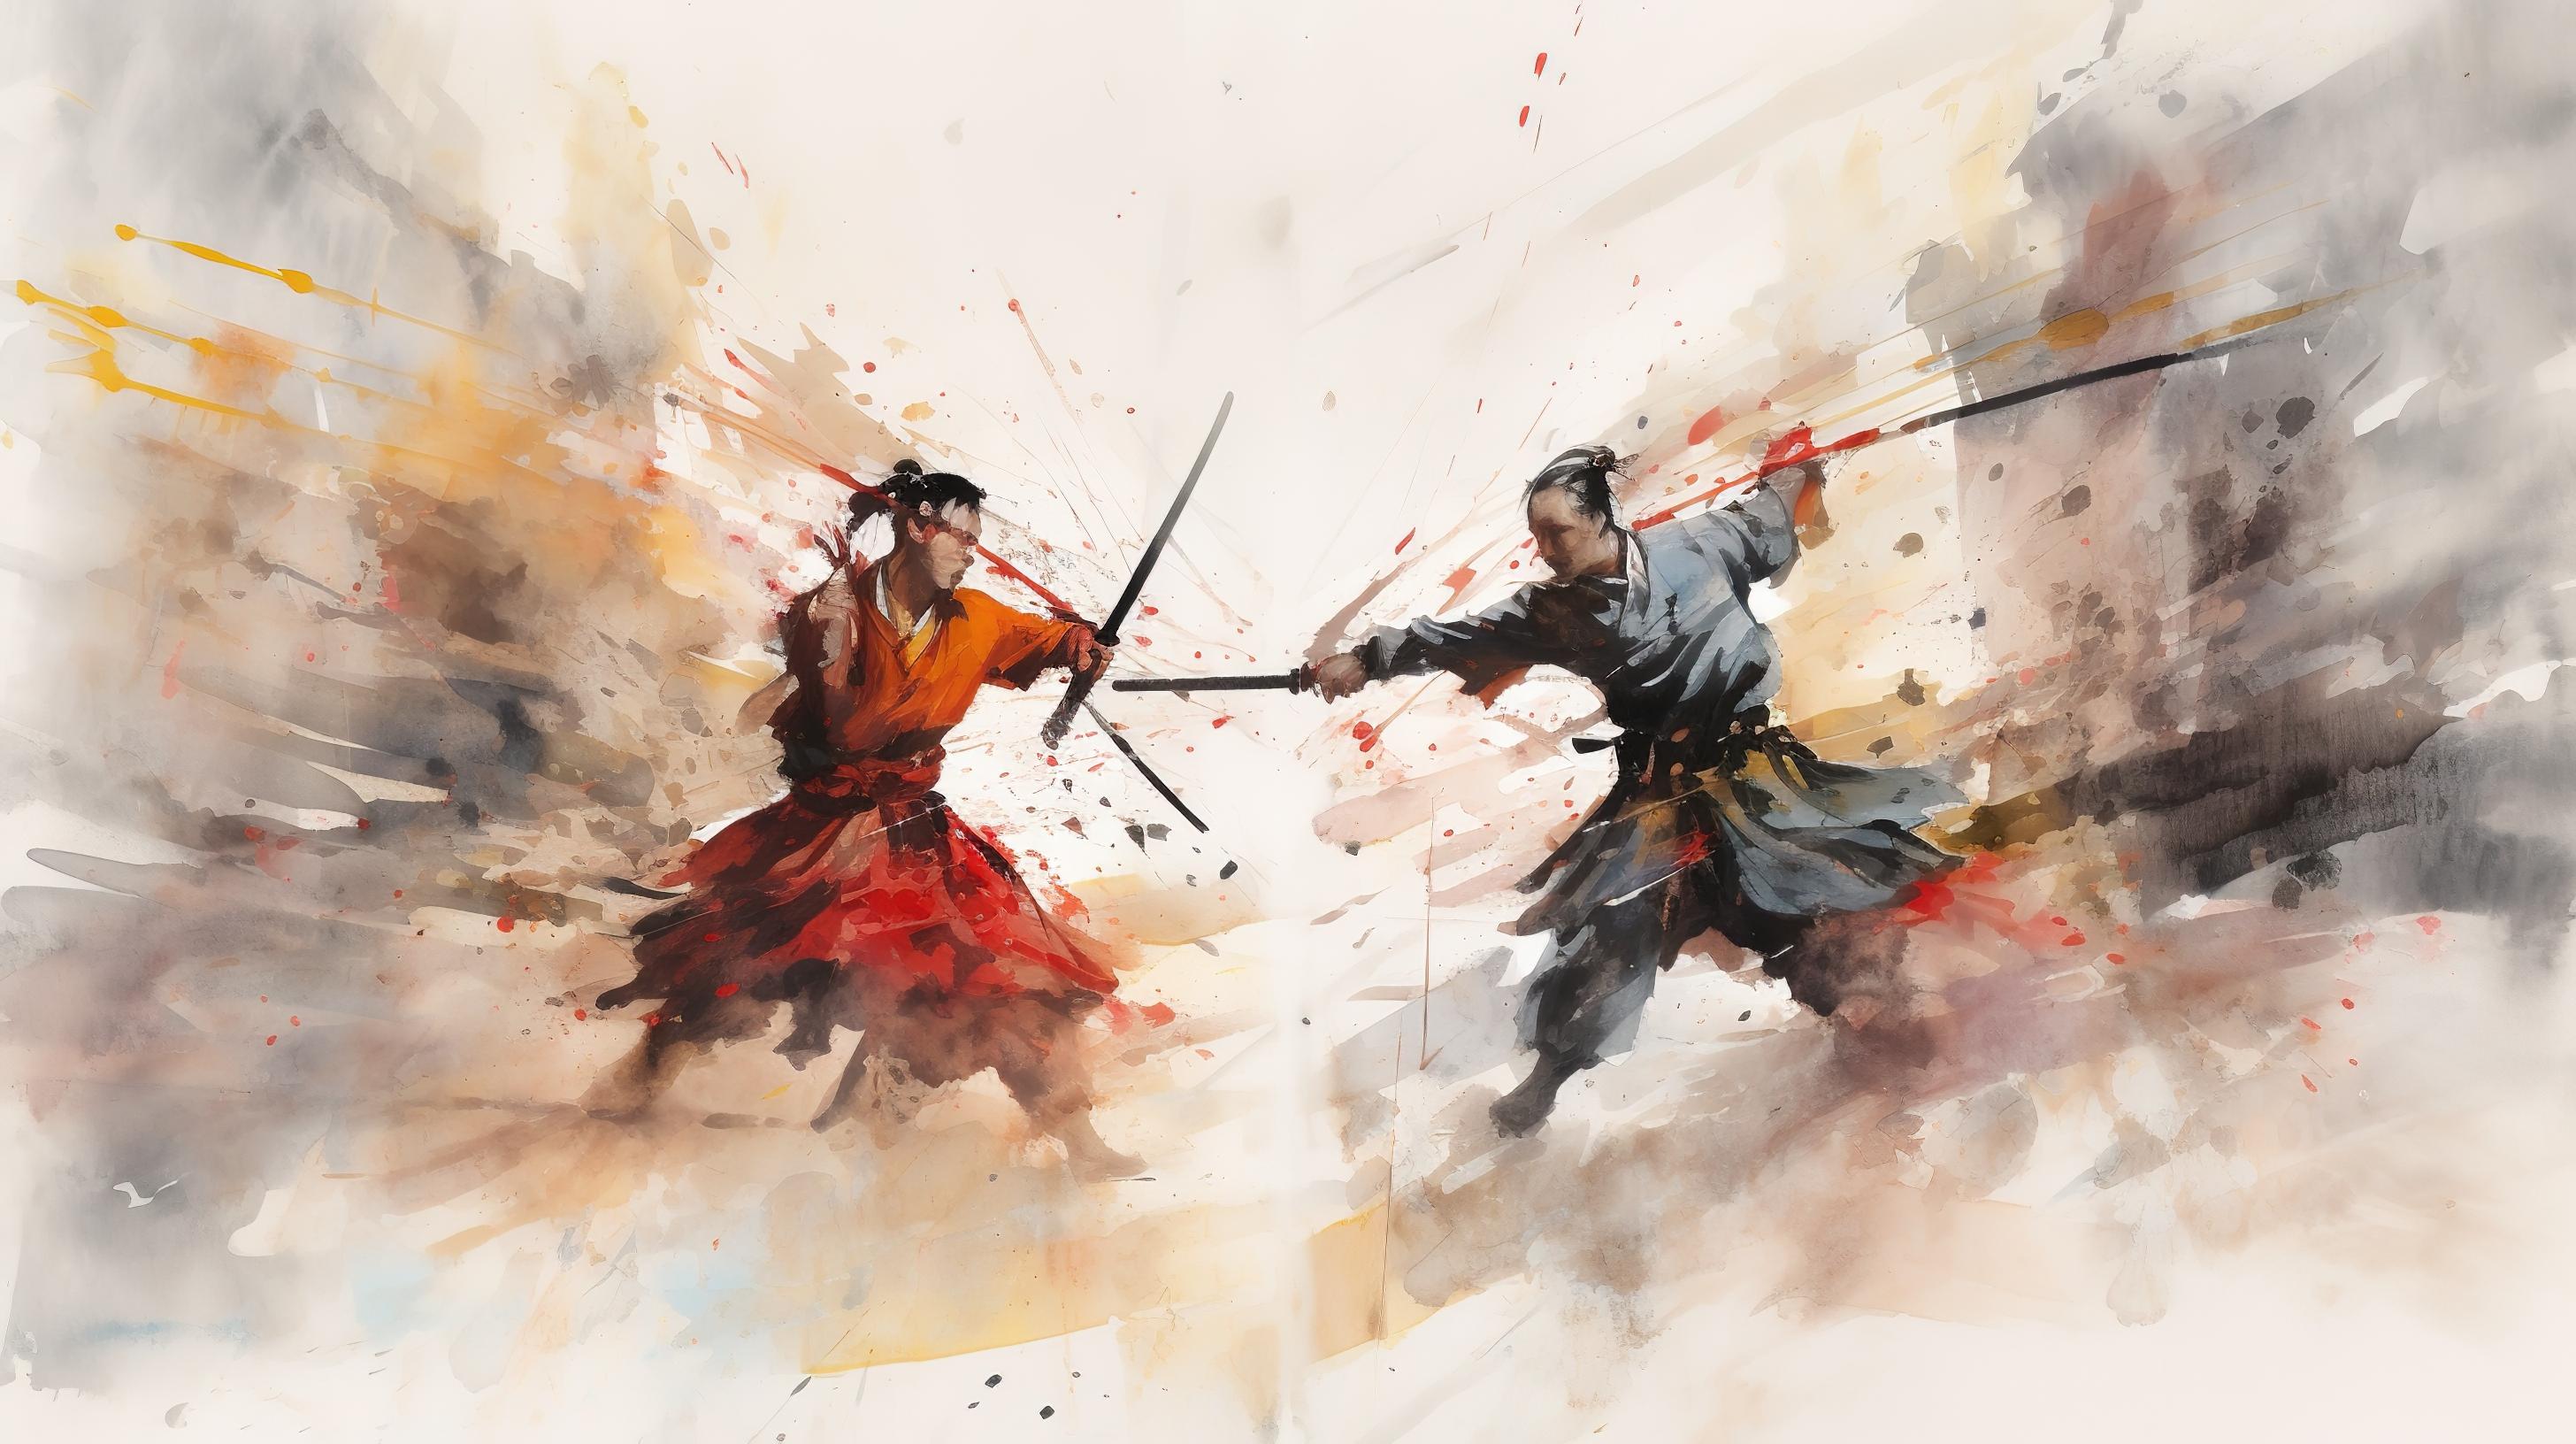 action_film_of_two_swordsmen_fighting_by_wu_guanzhong_by_willia-gigapixel-scale-2_00x_6.jpg